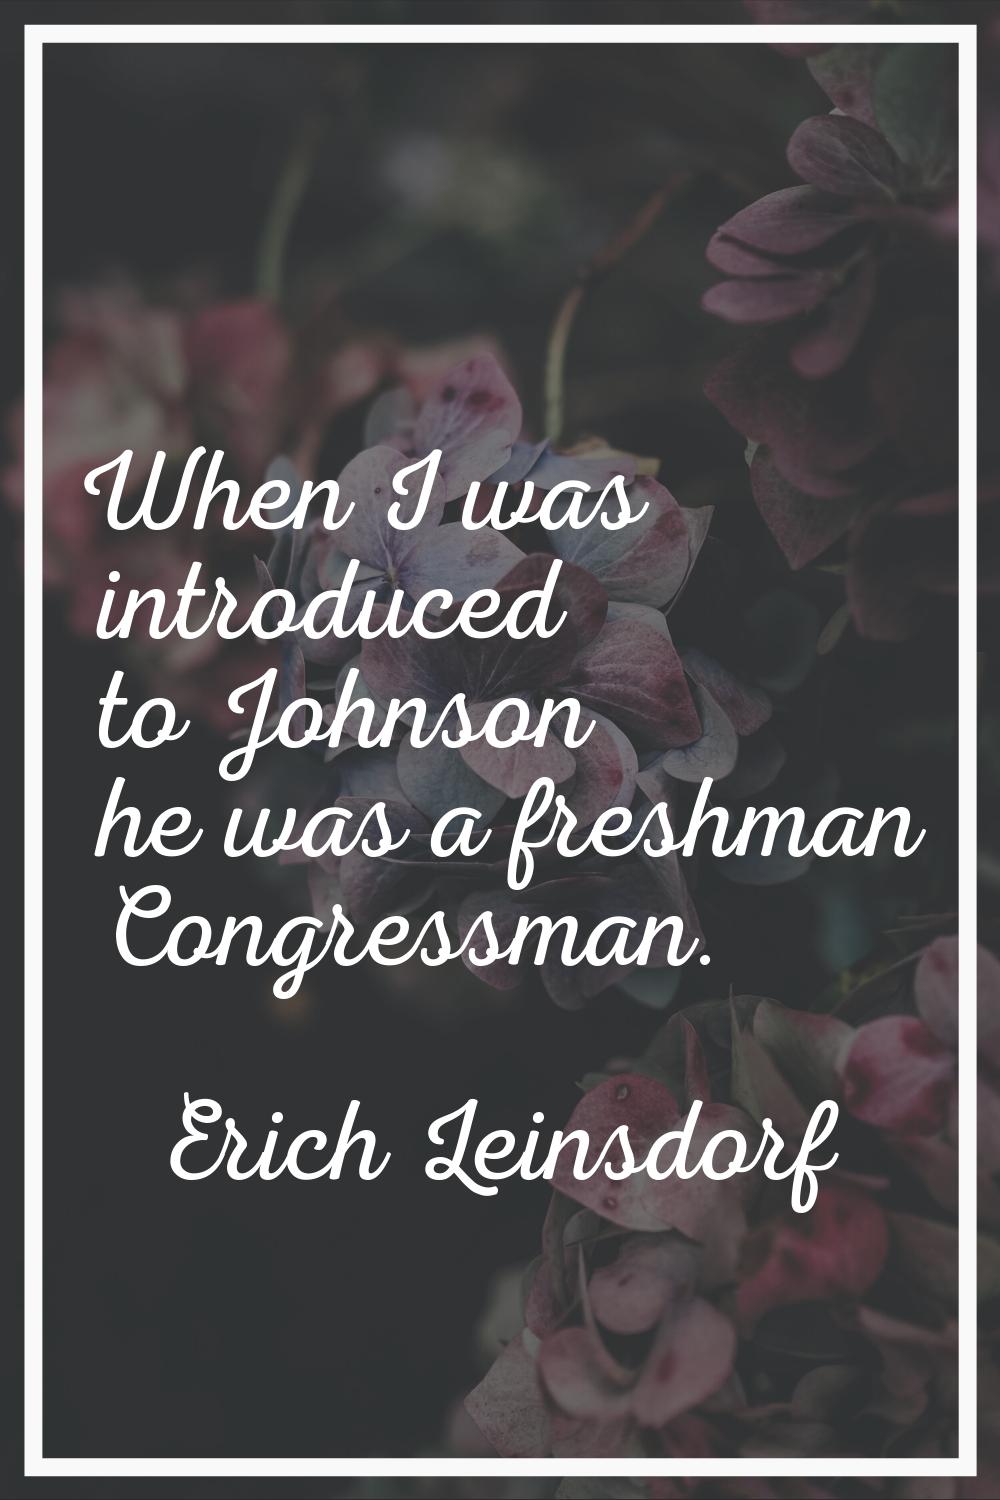 When I was introduced to Johnson he was a freshman Congressman.